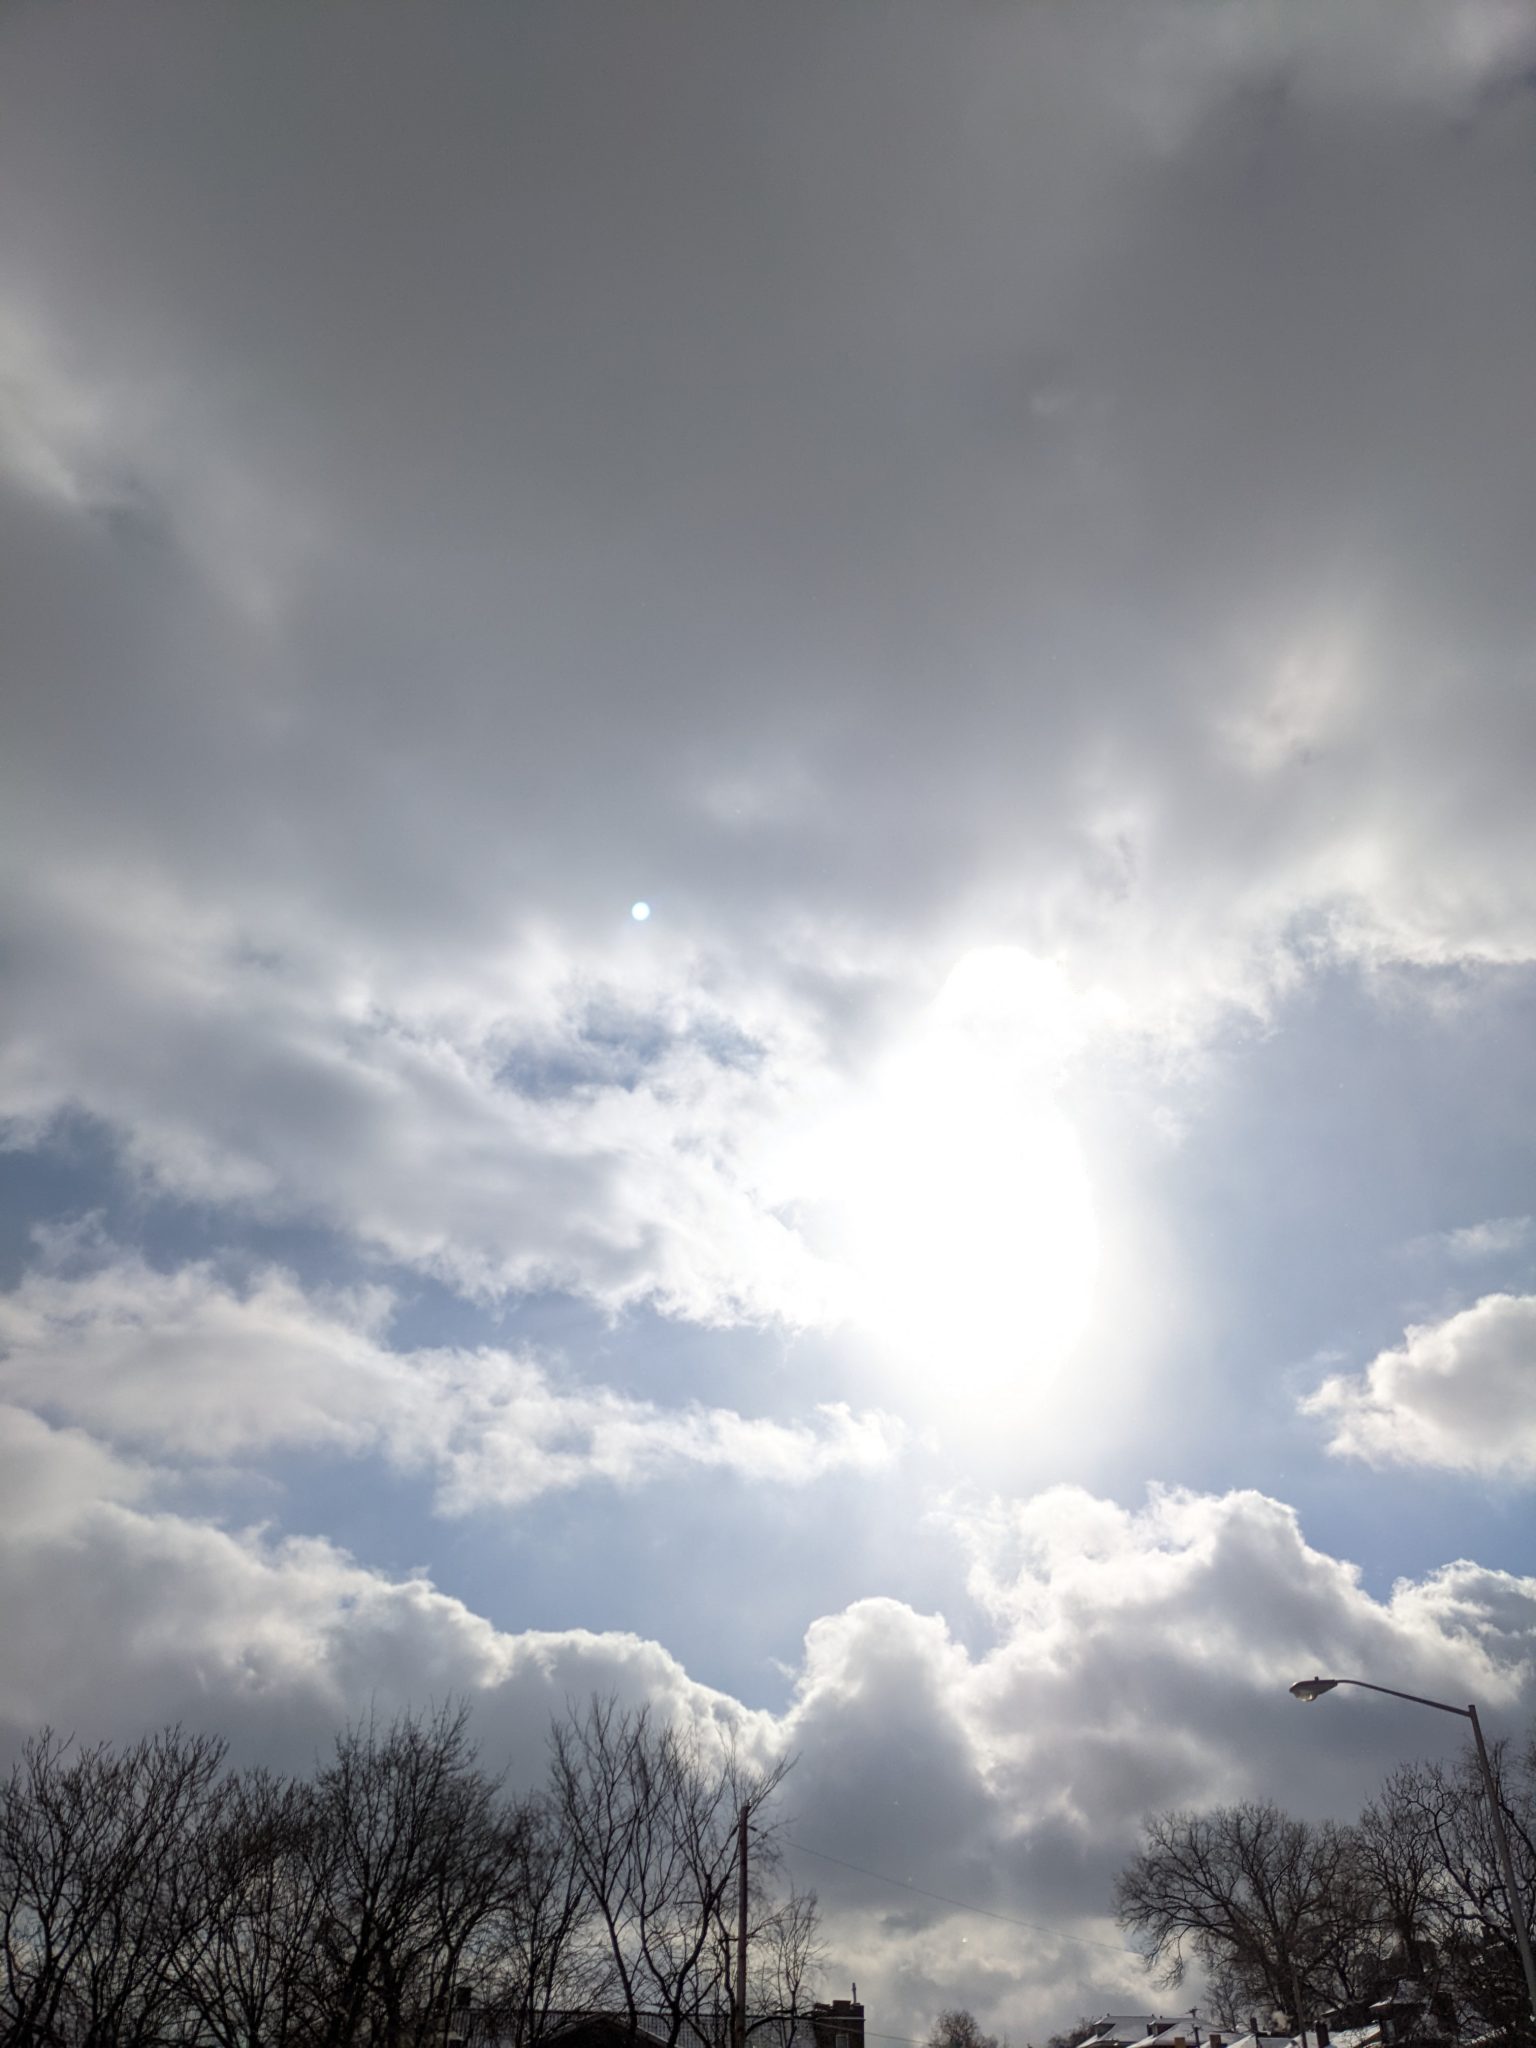 This sun shining through the clouds